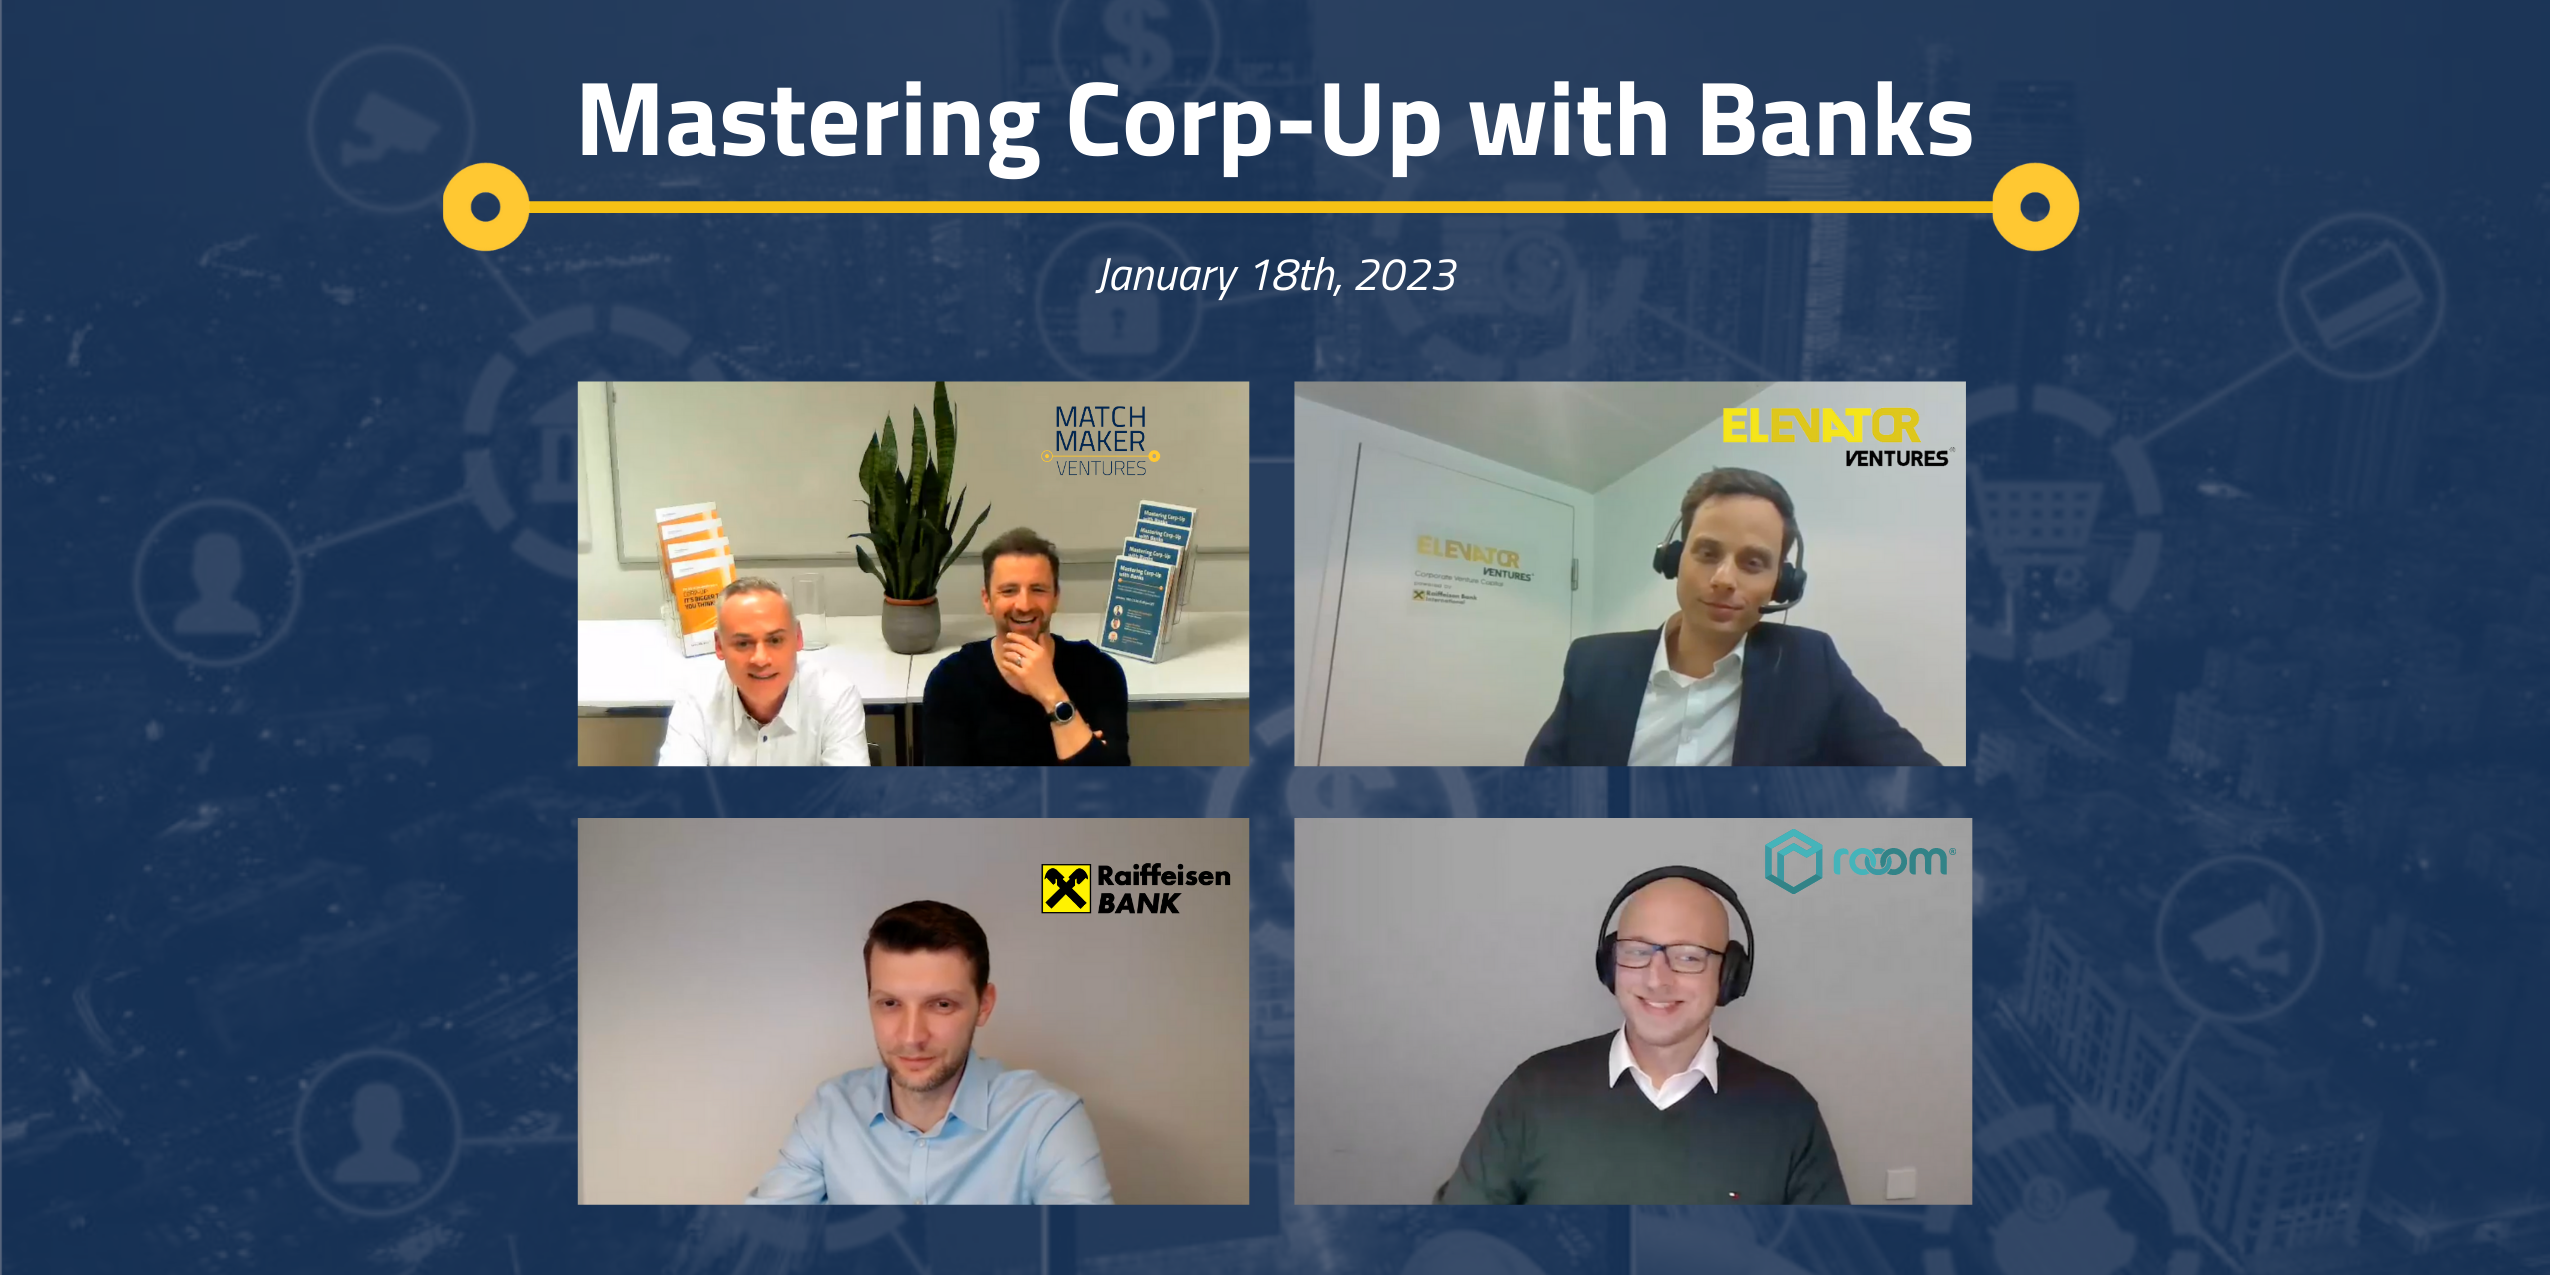 Mastering Corp-Up with Banks - webinar January 18th 2023